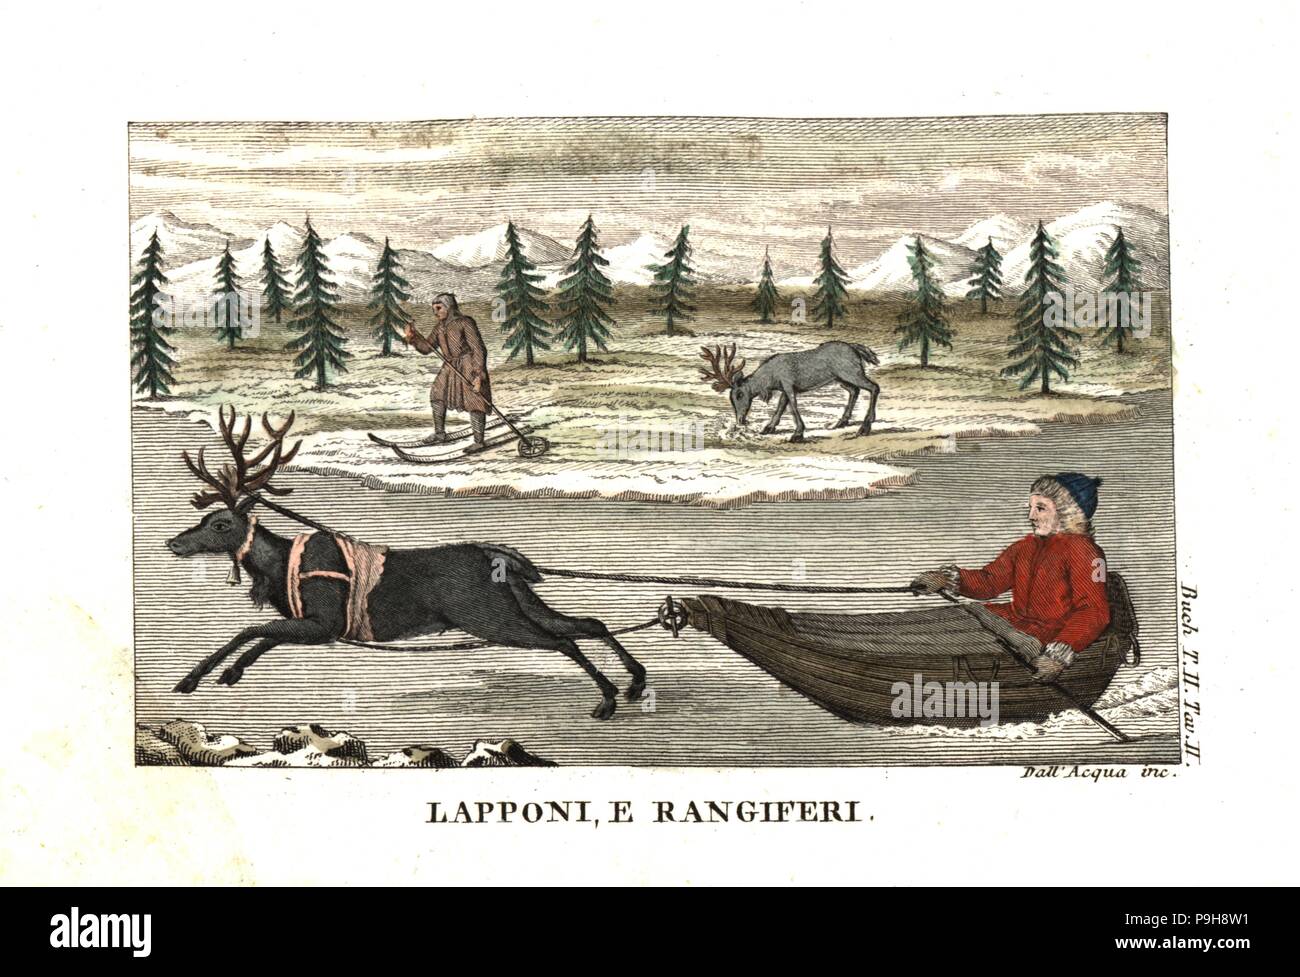 Sami man or Lapplander in a sleigh pulled by a reindeer on ice, and another man on skis. Illustration from Leopold von Buch’s Travels Through Norway and Lapland, 1813. Copperplate engraving by Dell'Acqua handcoloured by Lazaretti from Giovanni Battista Sonzogno’s Collection of the Most Interesting Voyages (Raccolta de Viaggi Piu Interessanti), Milan, 1815-1817. Stock Photo